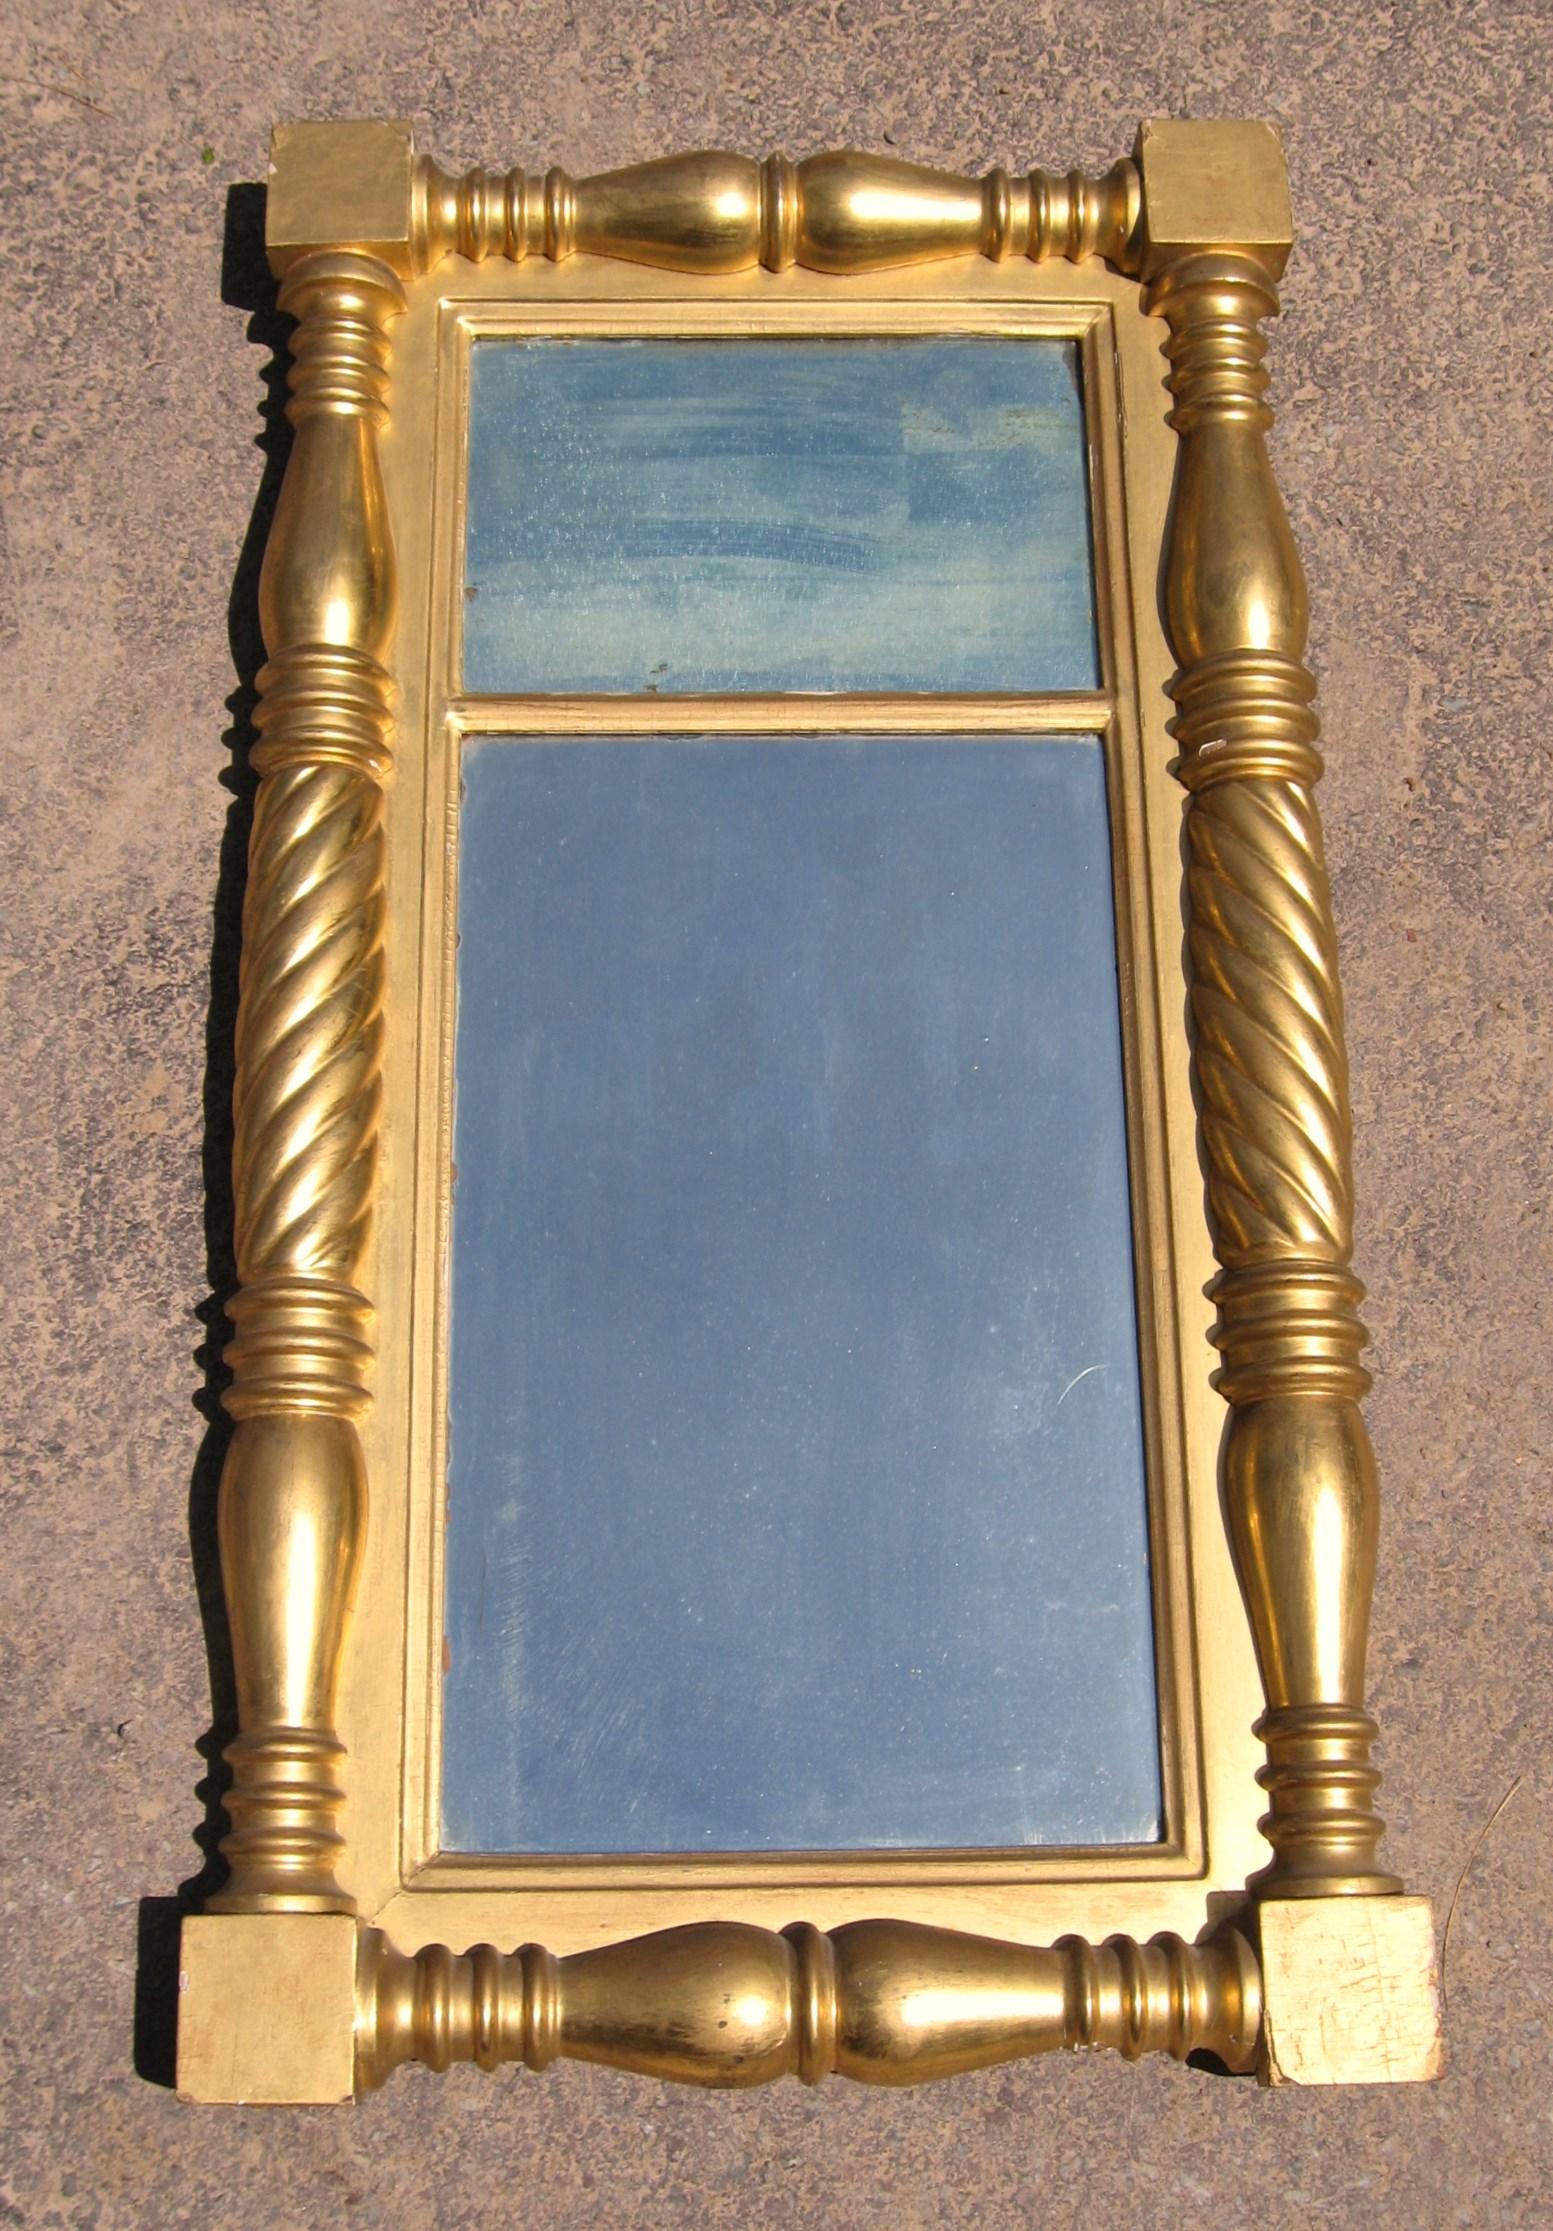 Wonderful two section neoclassical gold leaf gilt mirror, it retains the original mirror and gold gilt. Measuring 19 1/8 inches wide x 35 3/8 inches high x 2 3/4 inches deep, Minor wear as shown in the photos. Lovely gold gilt wall mirror. Wonderful